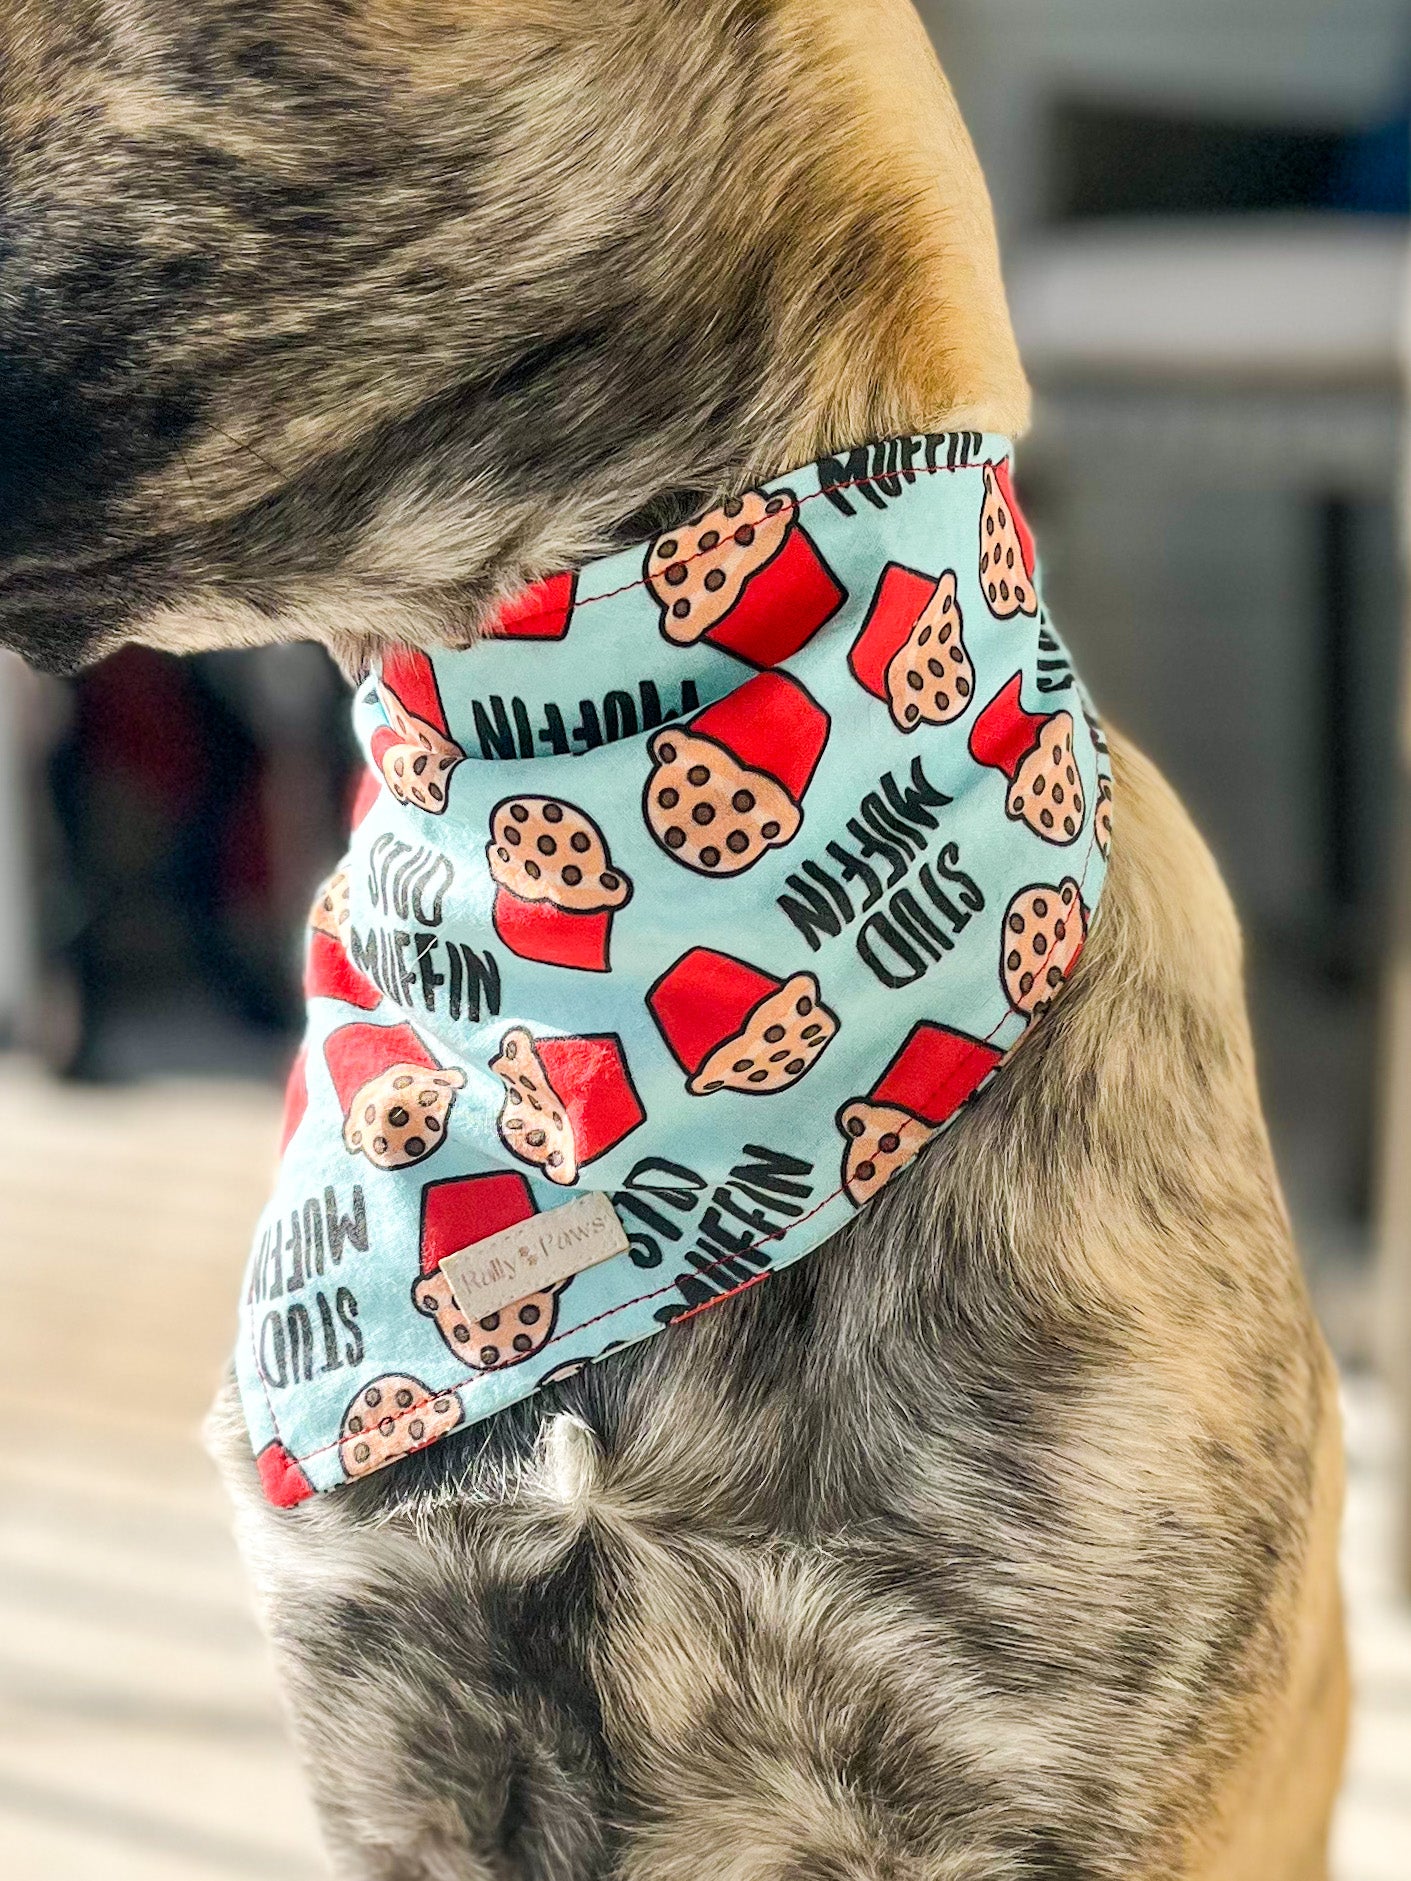 side view of brindle color dog wearing stud muffin dog bandana